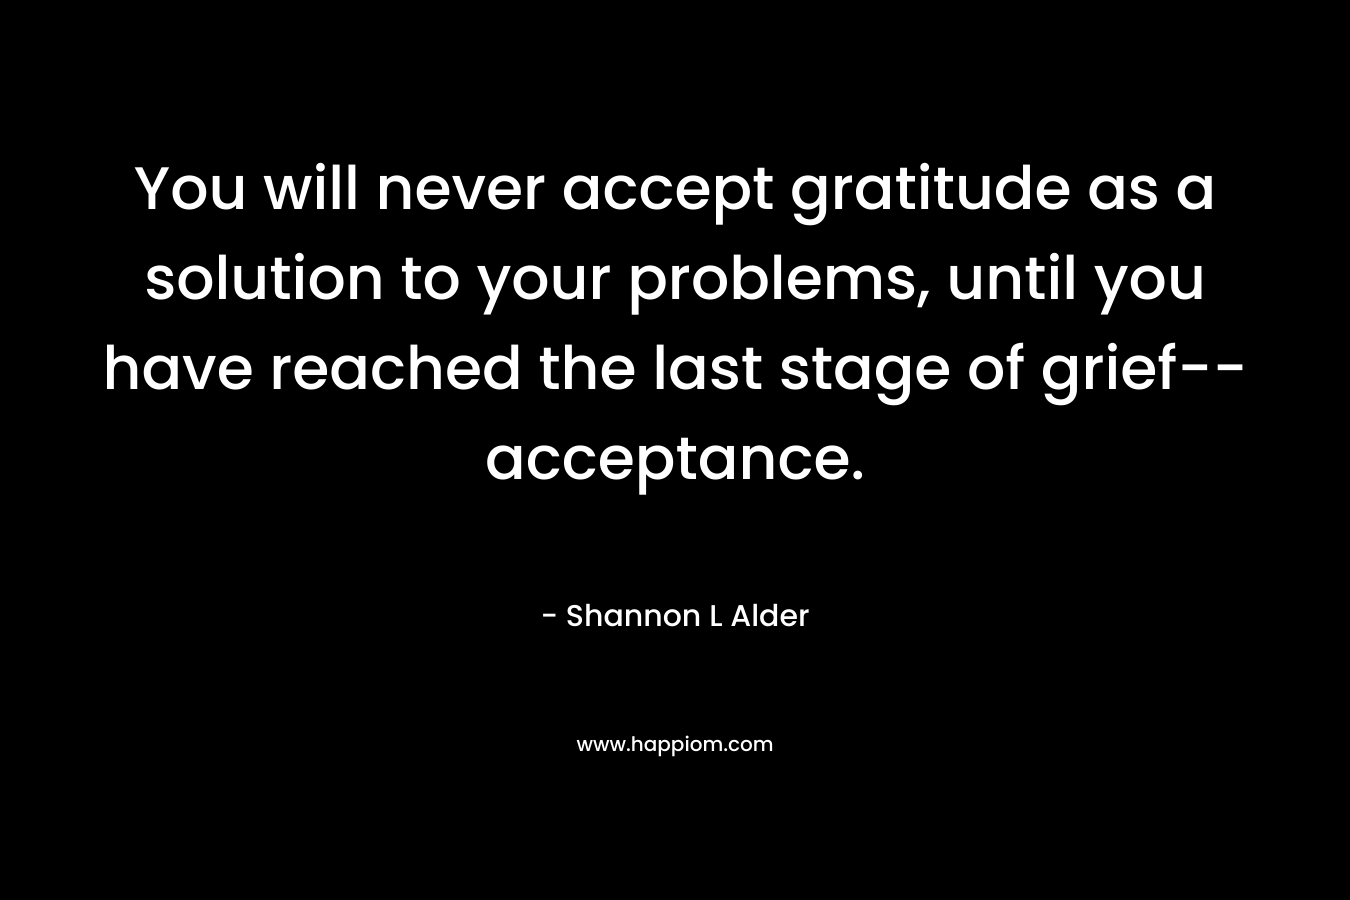 You will never accept gratitude as a solution to your problems, until you have reached the last stage of grief--acceptance.